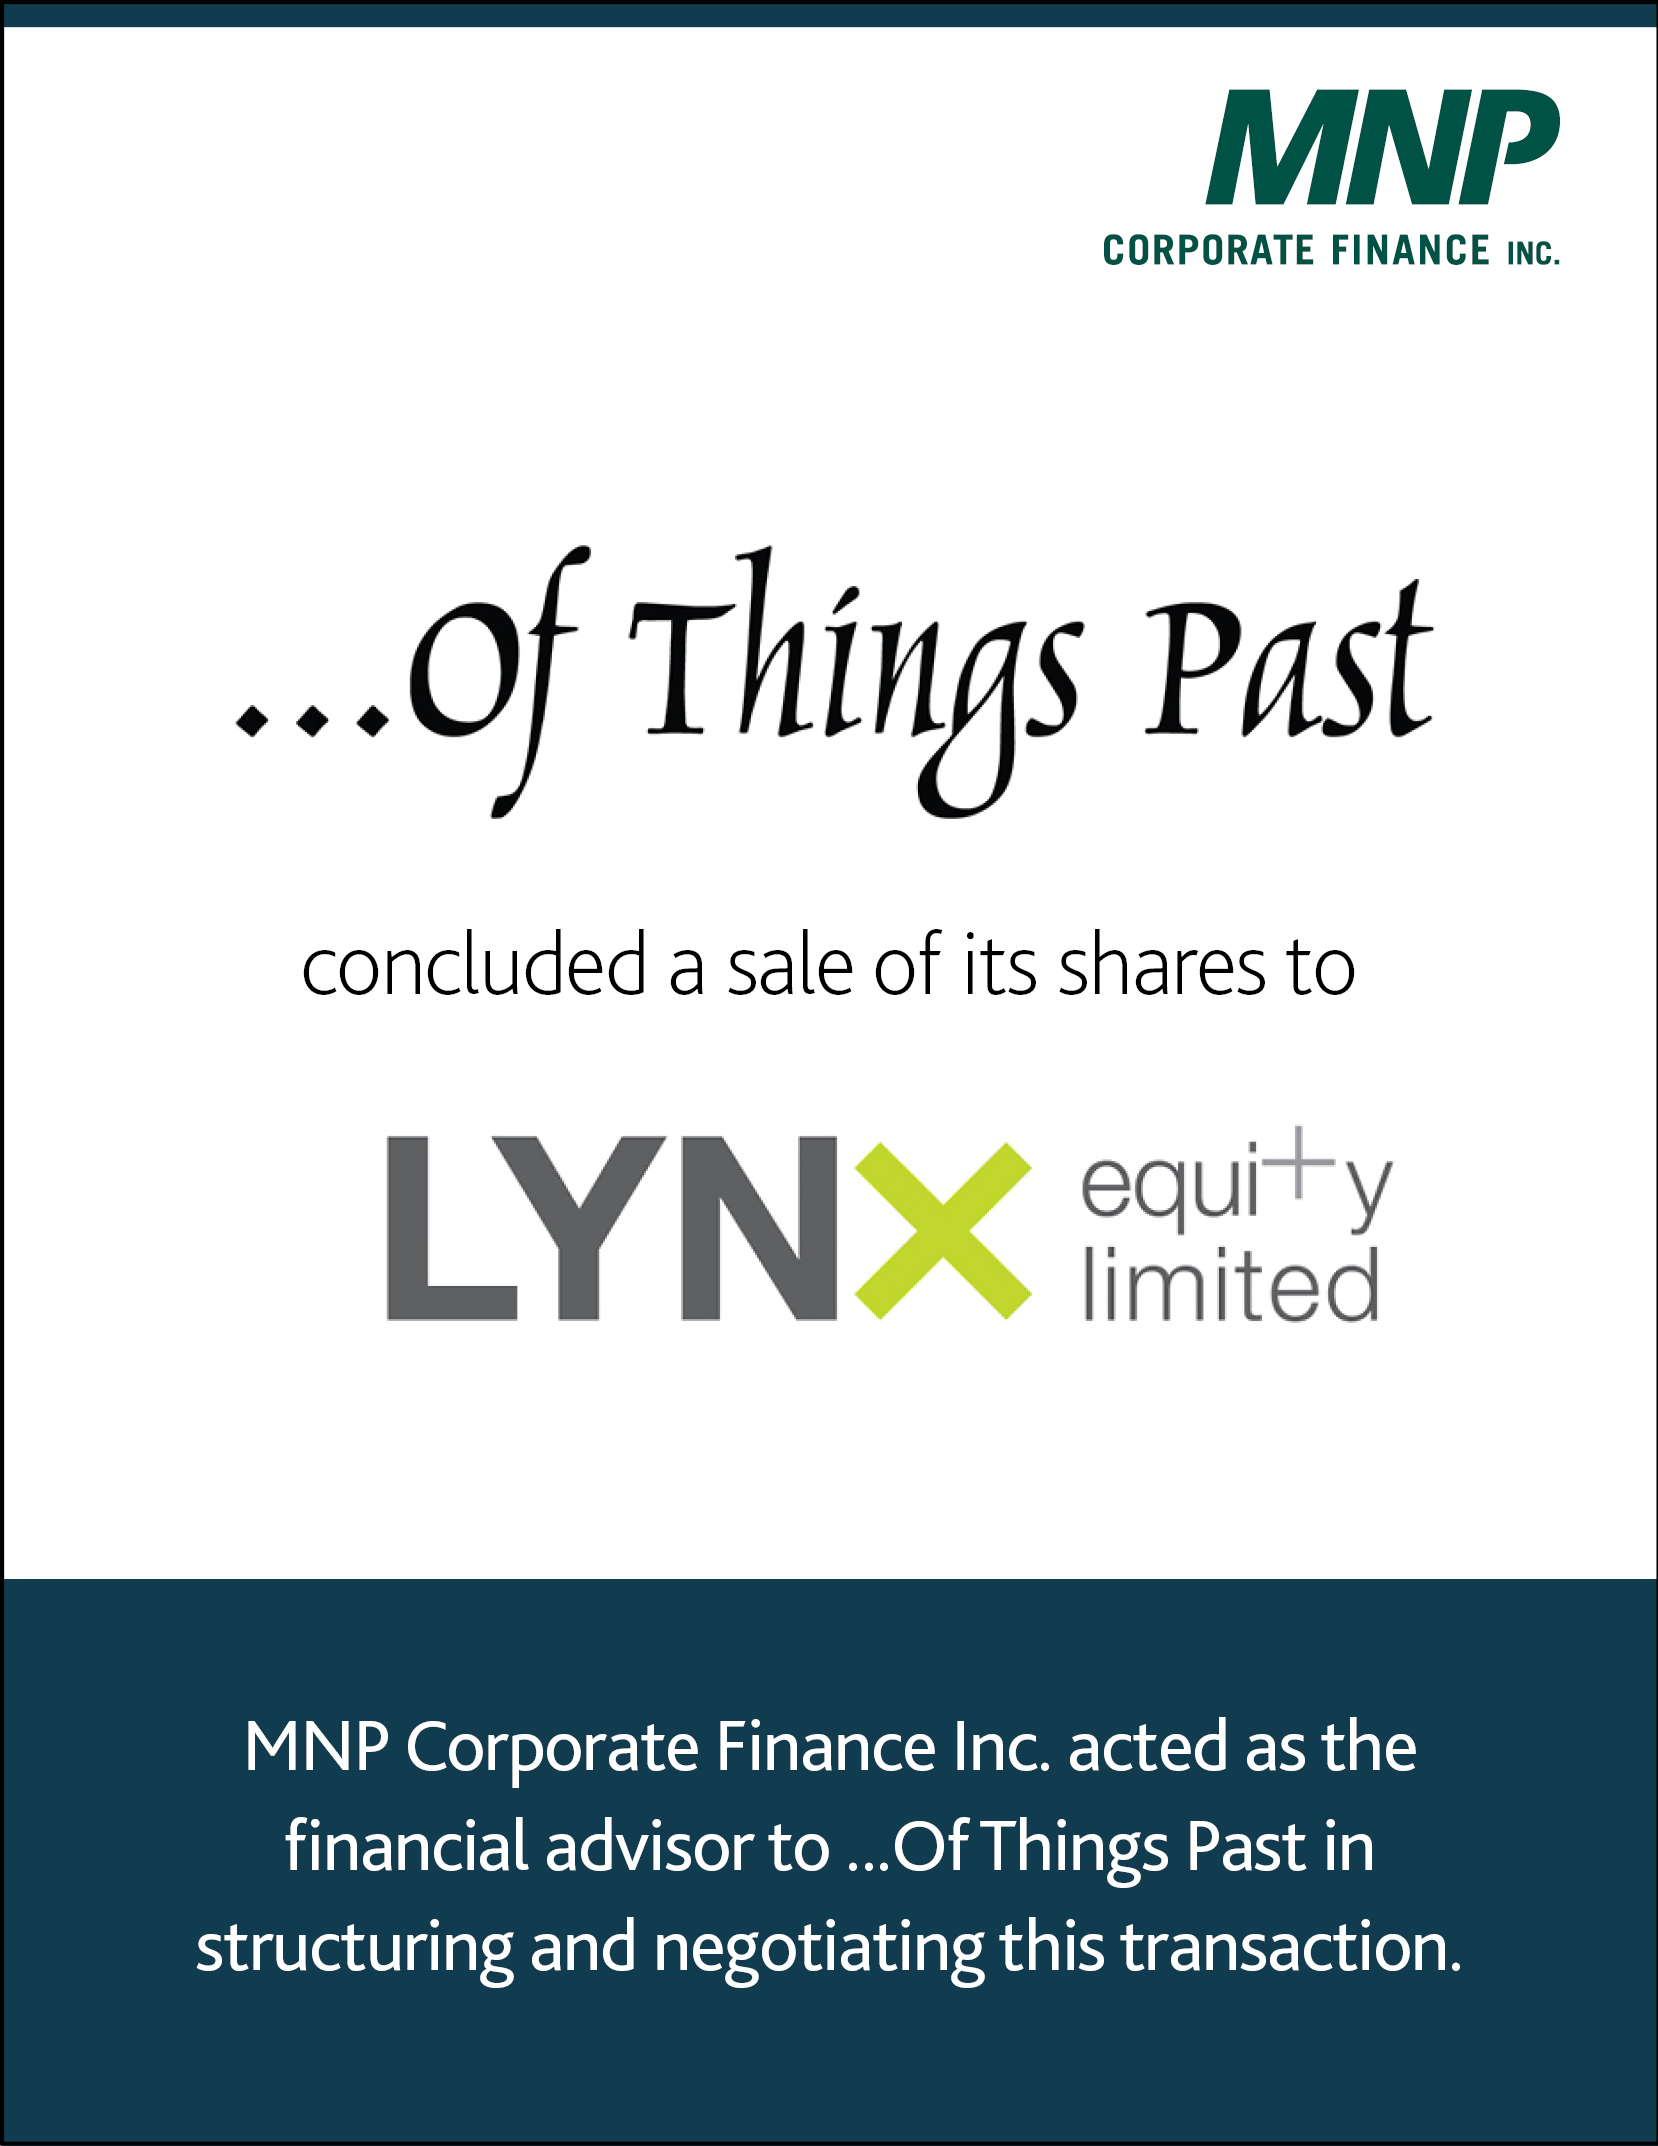 ... Of Things Past concluded a sale of its shares to Lynx Equity Limited. 